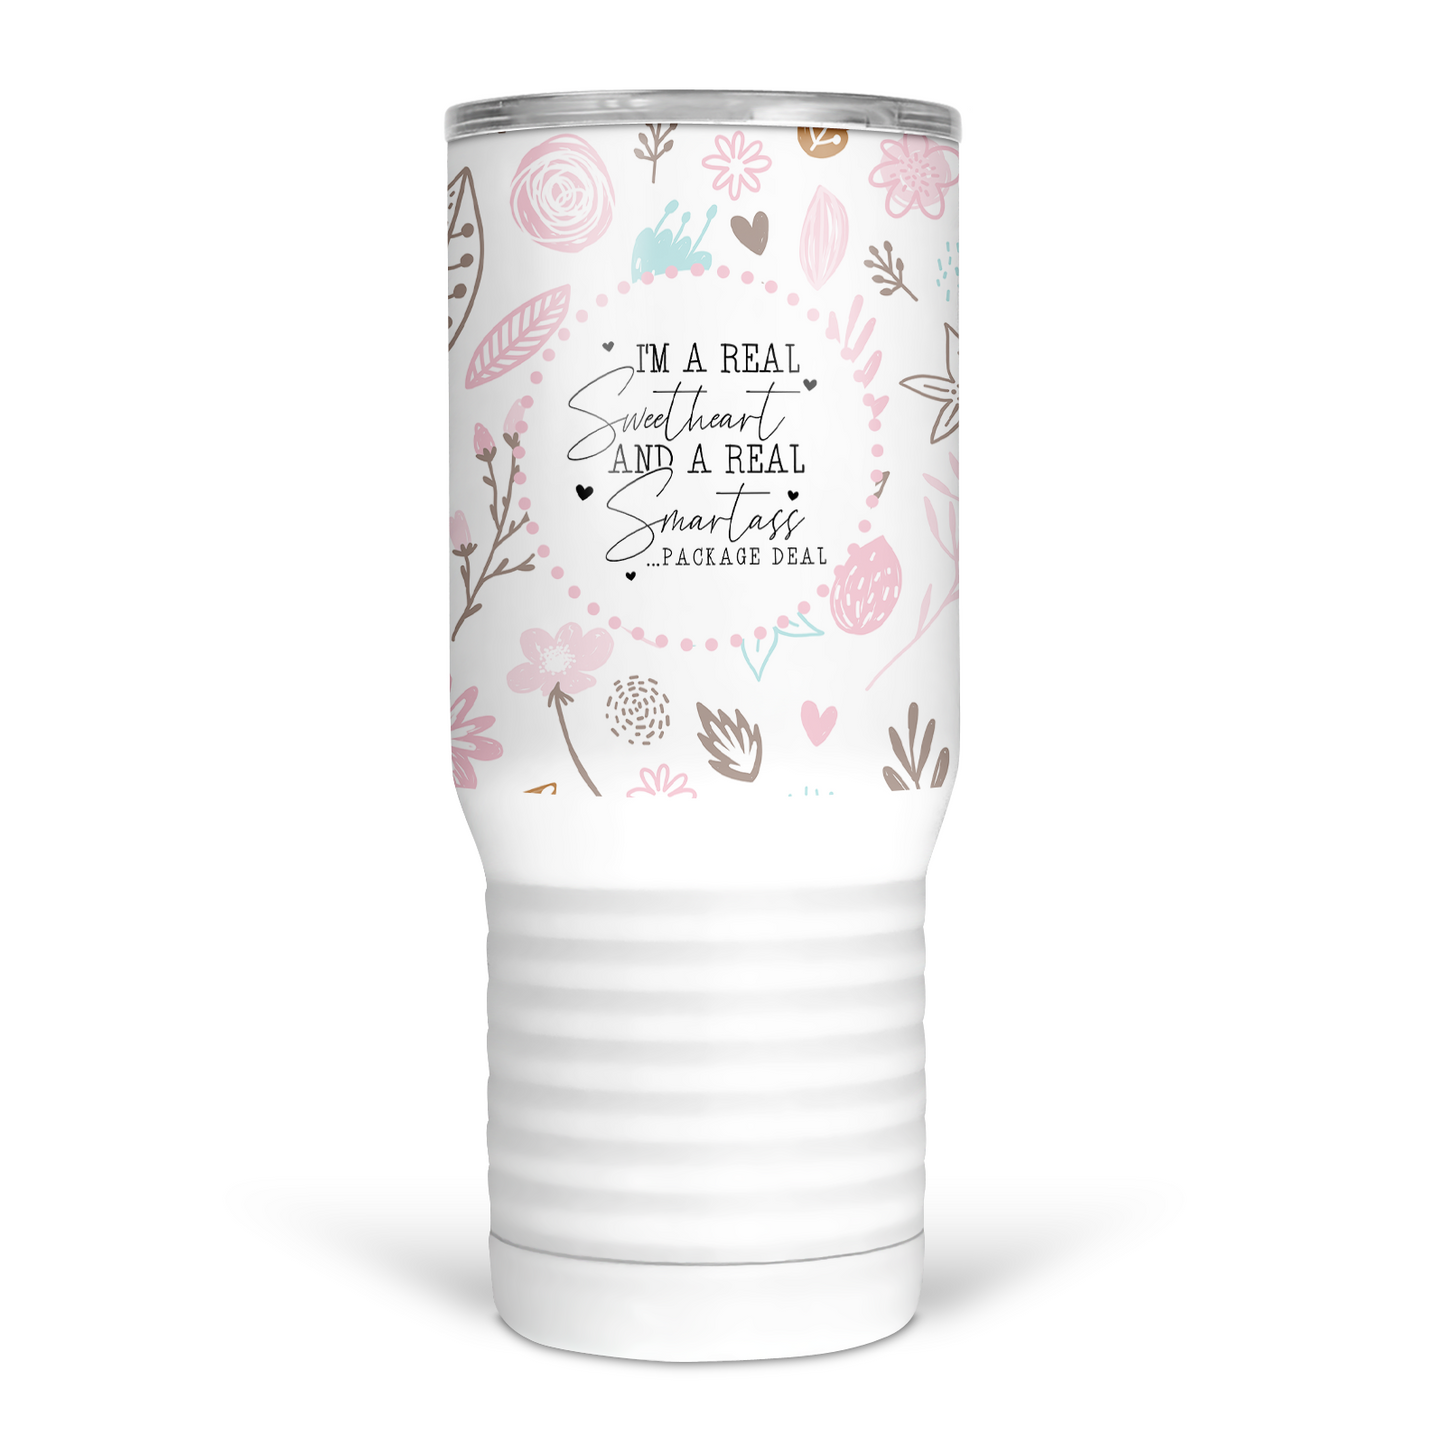 I'm A Real Sweetheart and A Real Smartass Package Deal 20 Oz Travel Tumbler